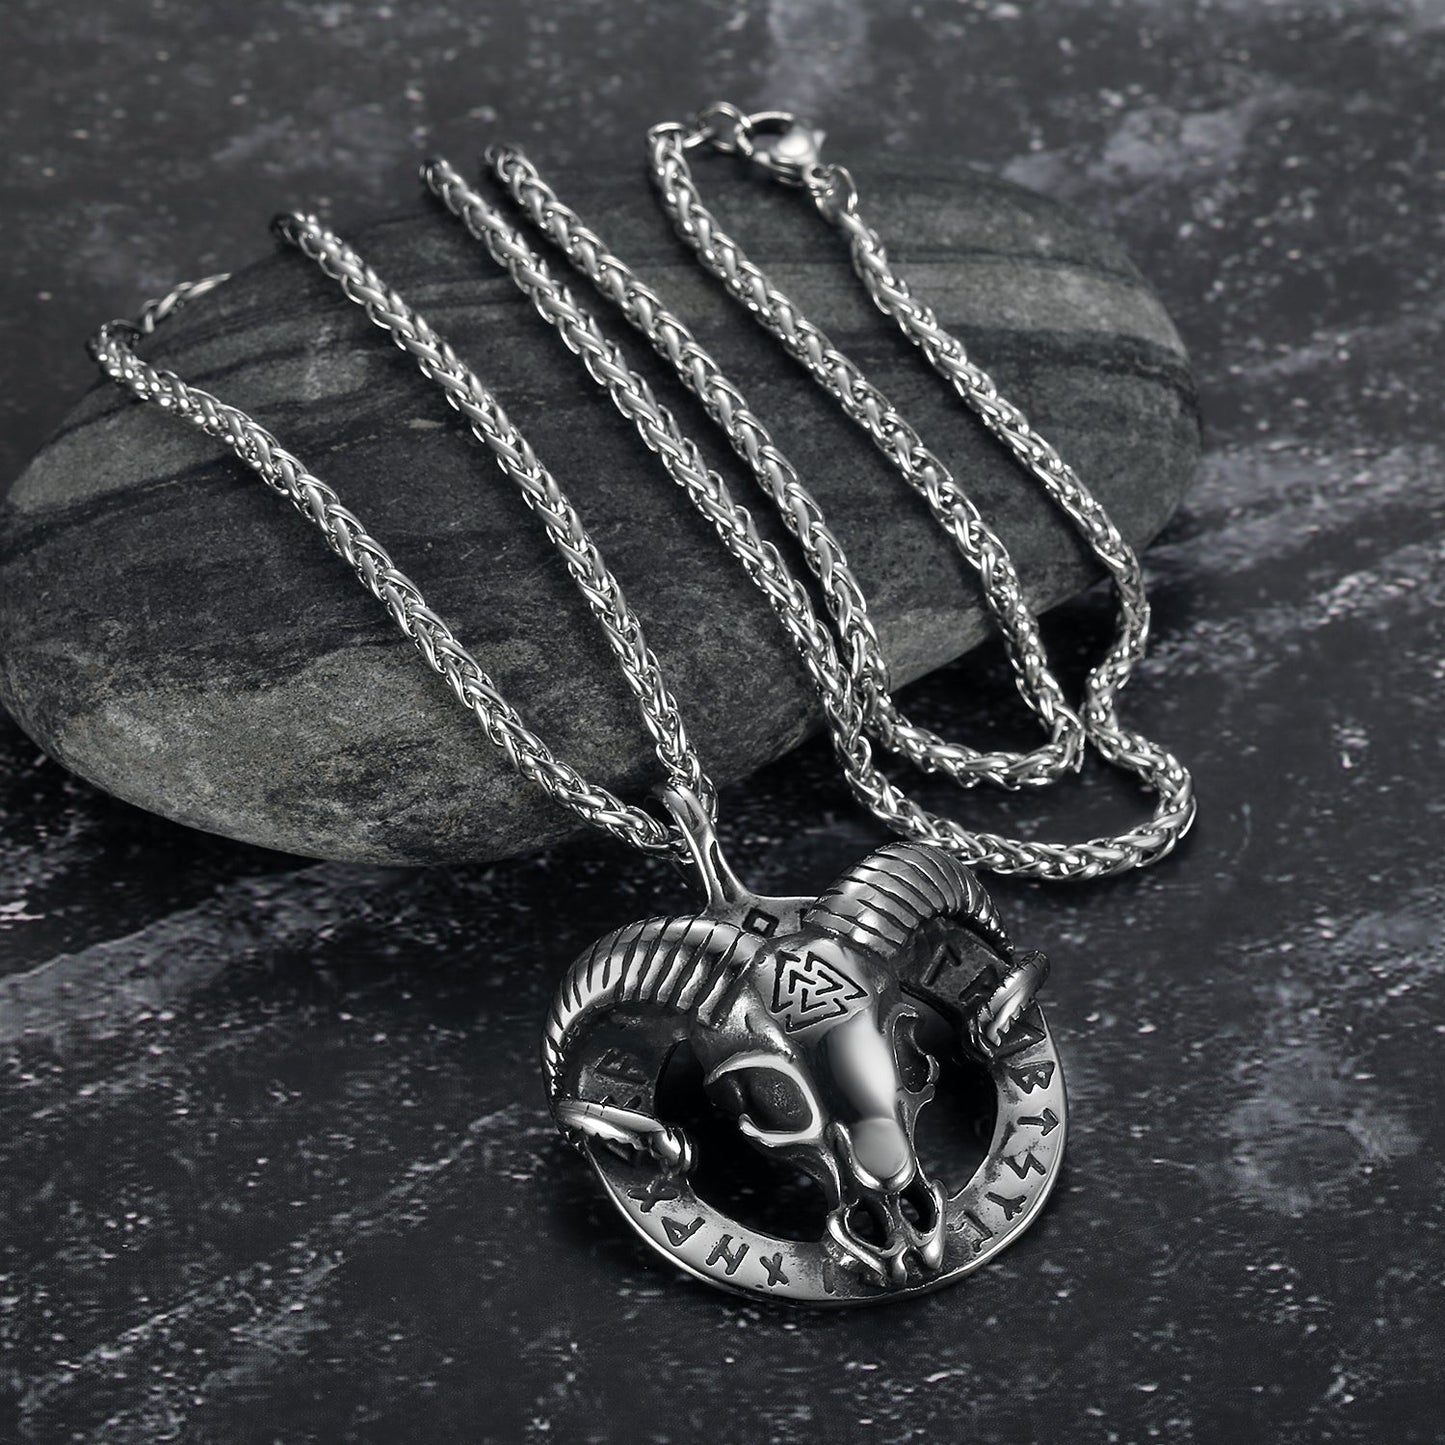 Nordic Pride Handcrafted Stainless Steel Goat Head Pendant & Chain with Valknut Symbol and Runes